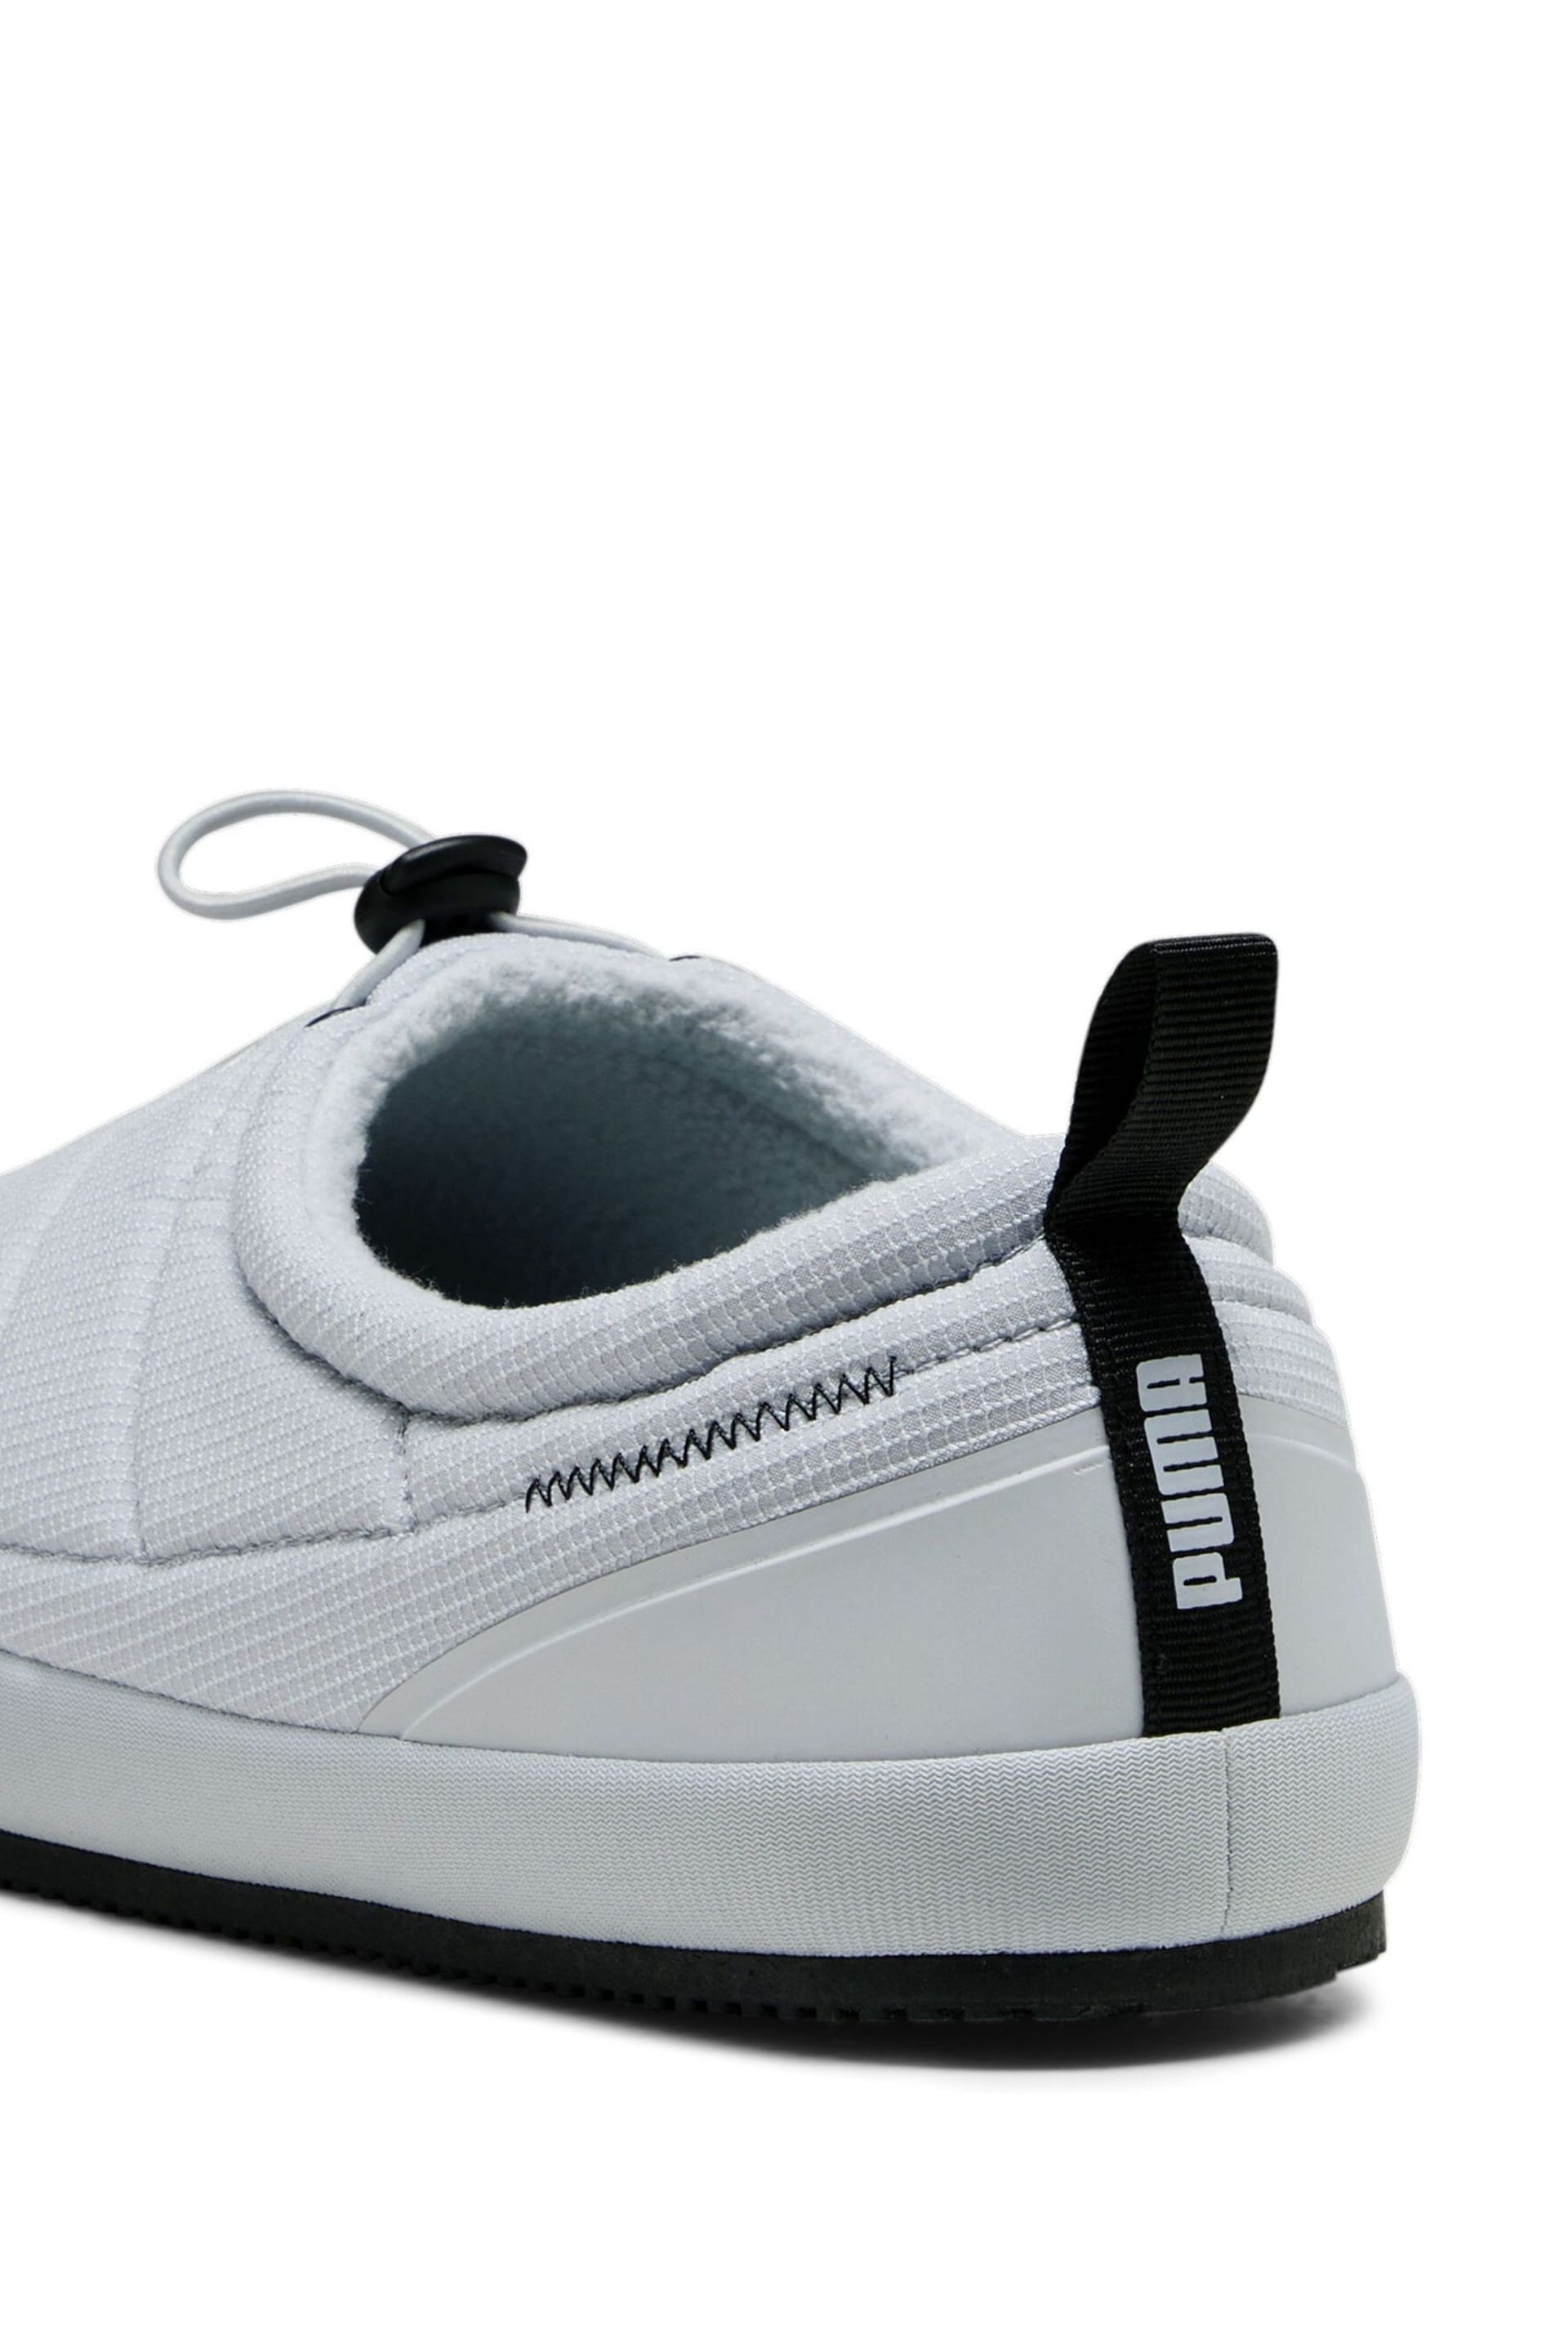 Puma Grey Plus Tuff Padded Over The Clouds Shoes - Image 6 of 8